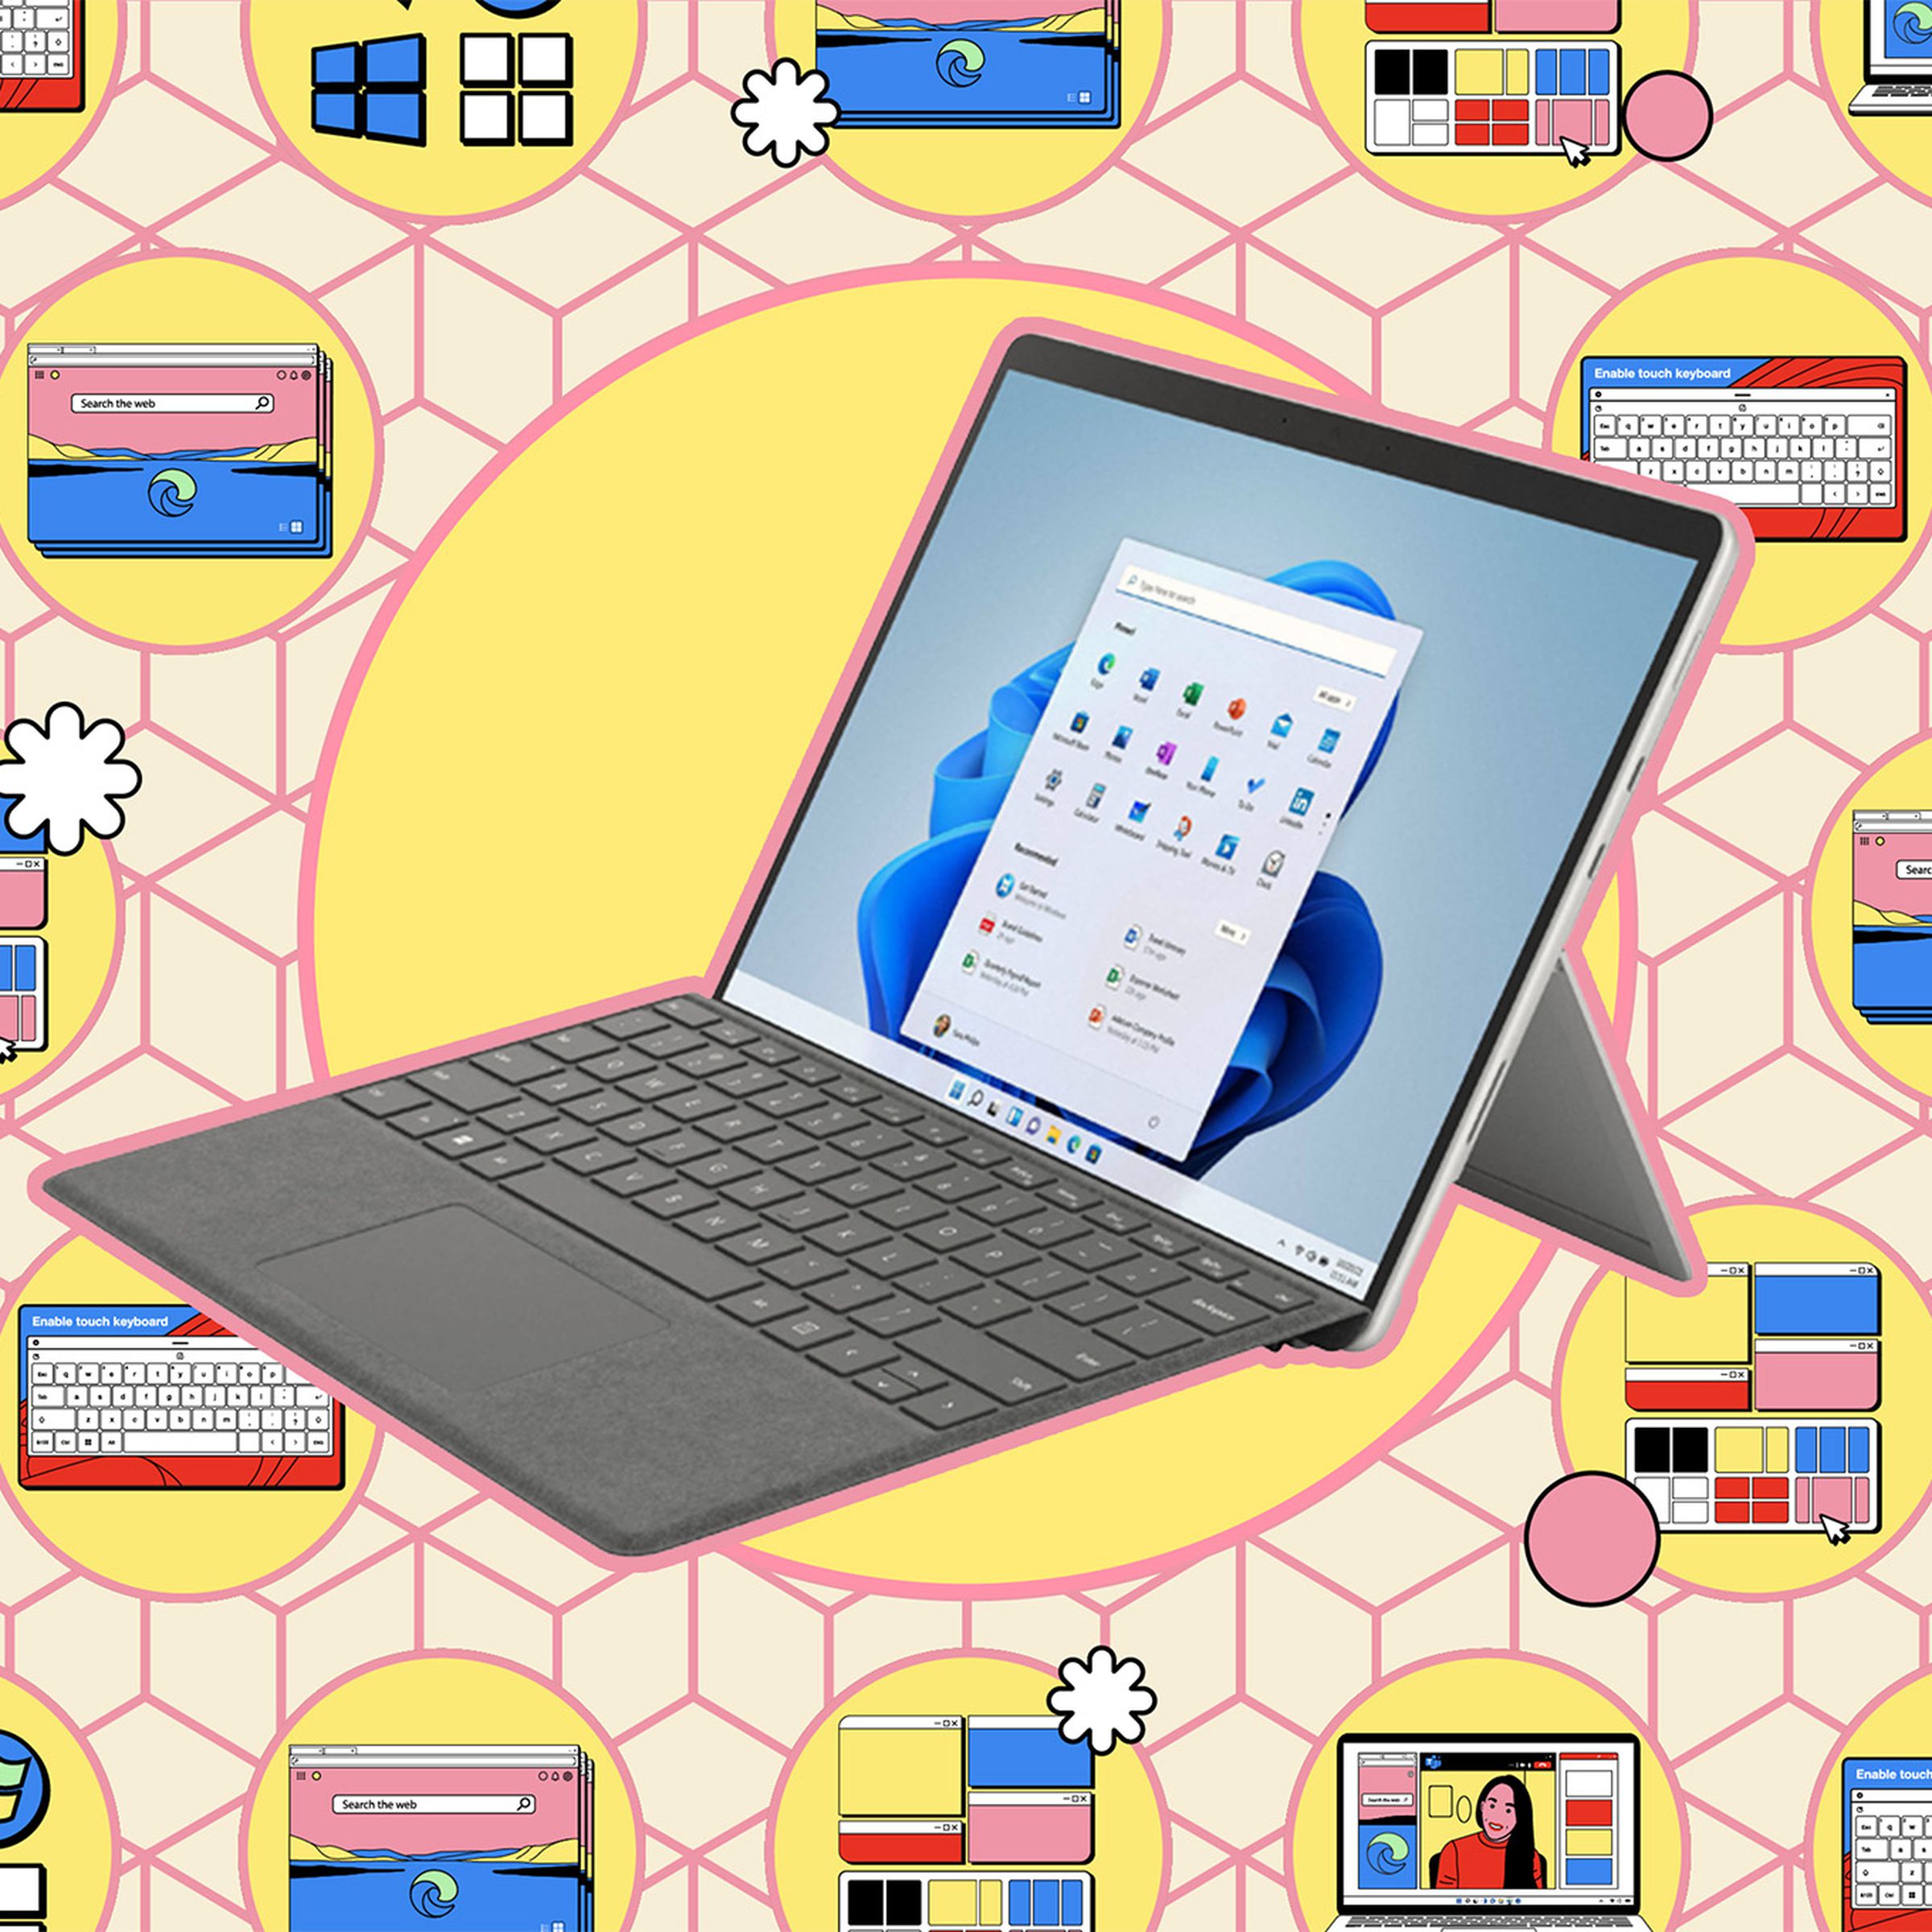 Windows laptop against yellow background with small illustrations